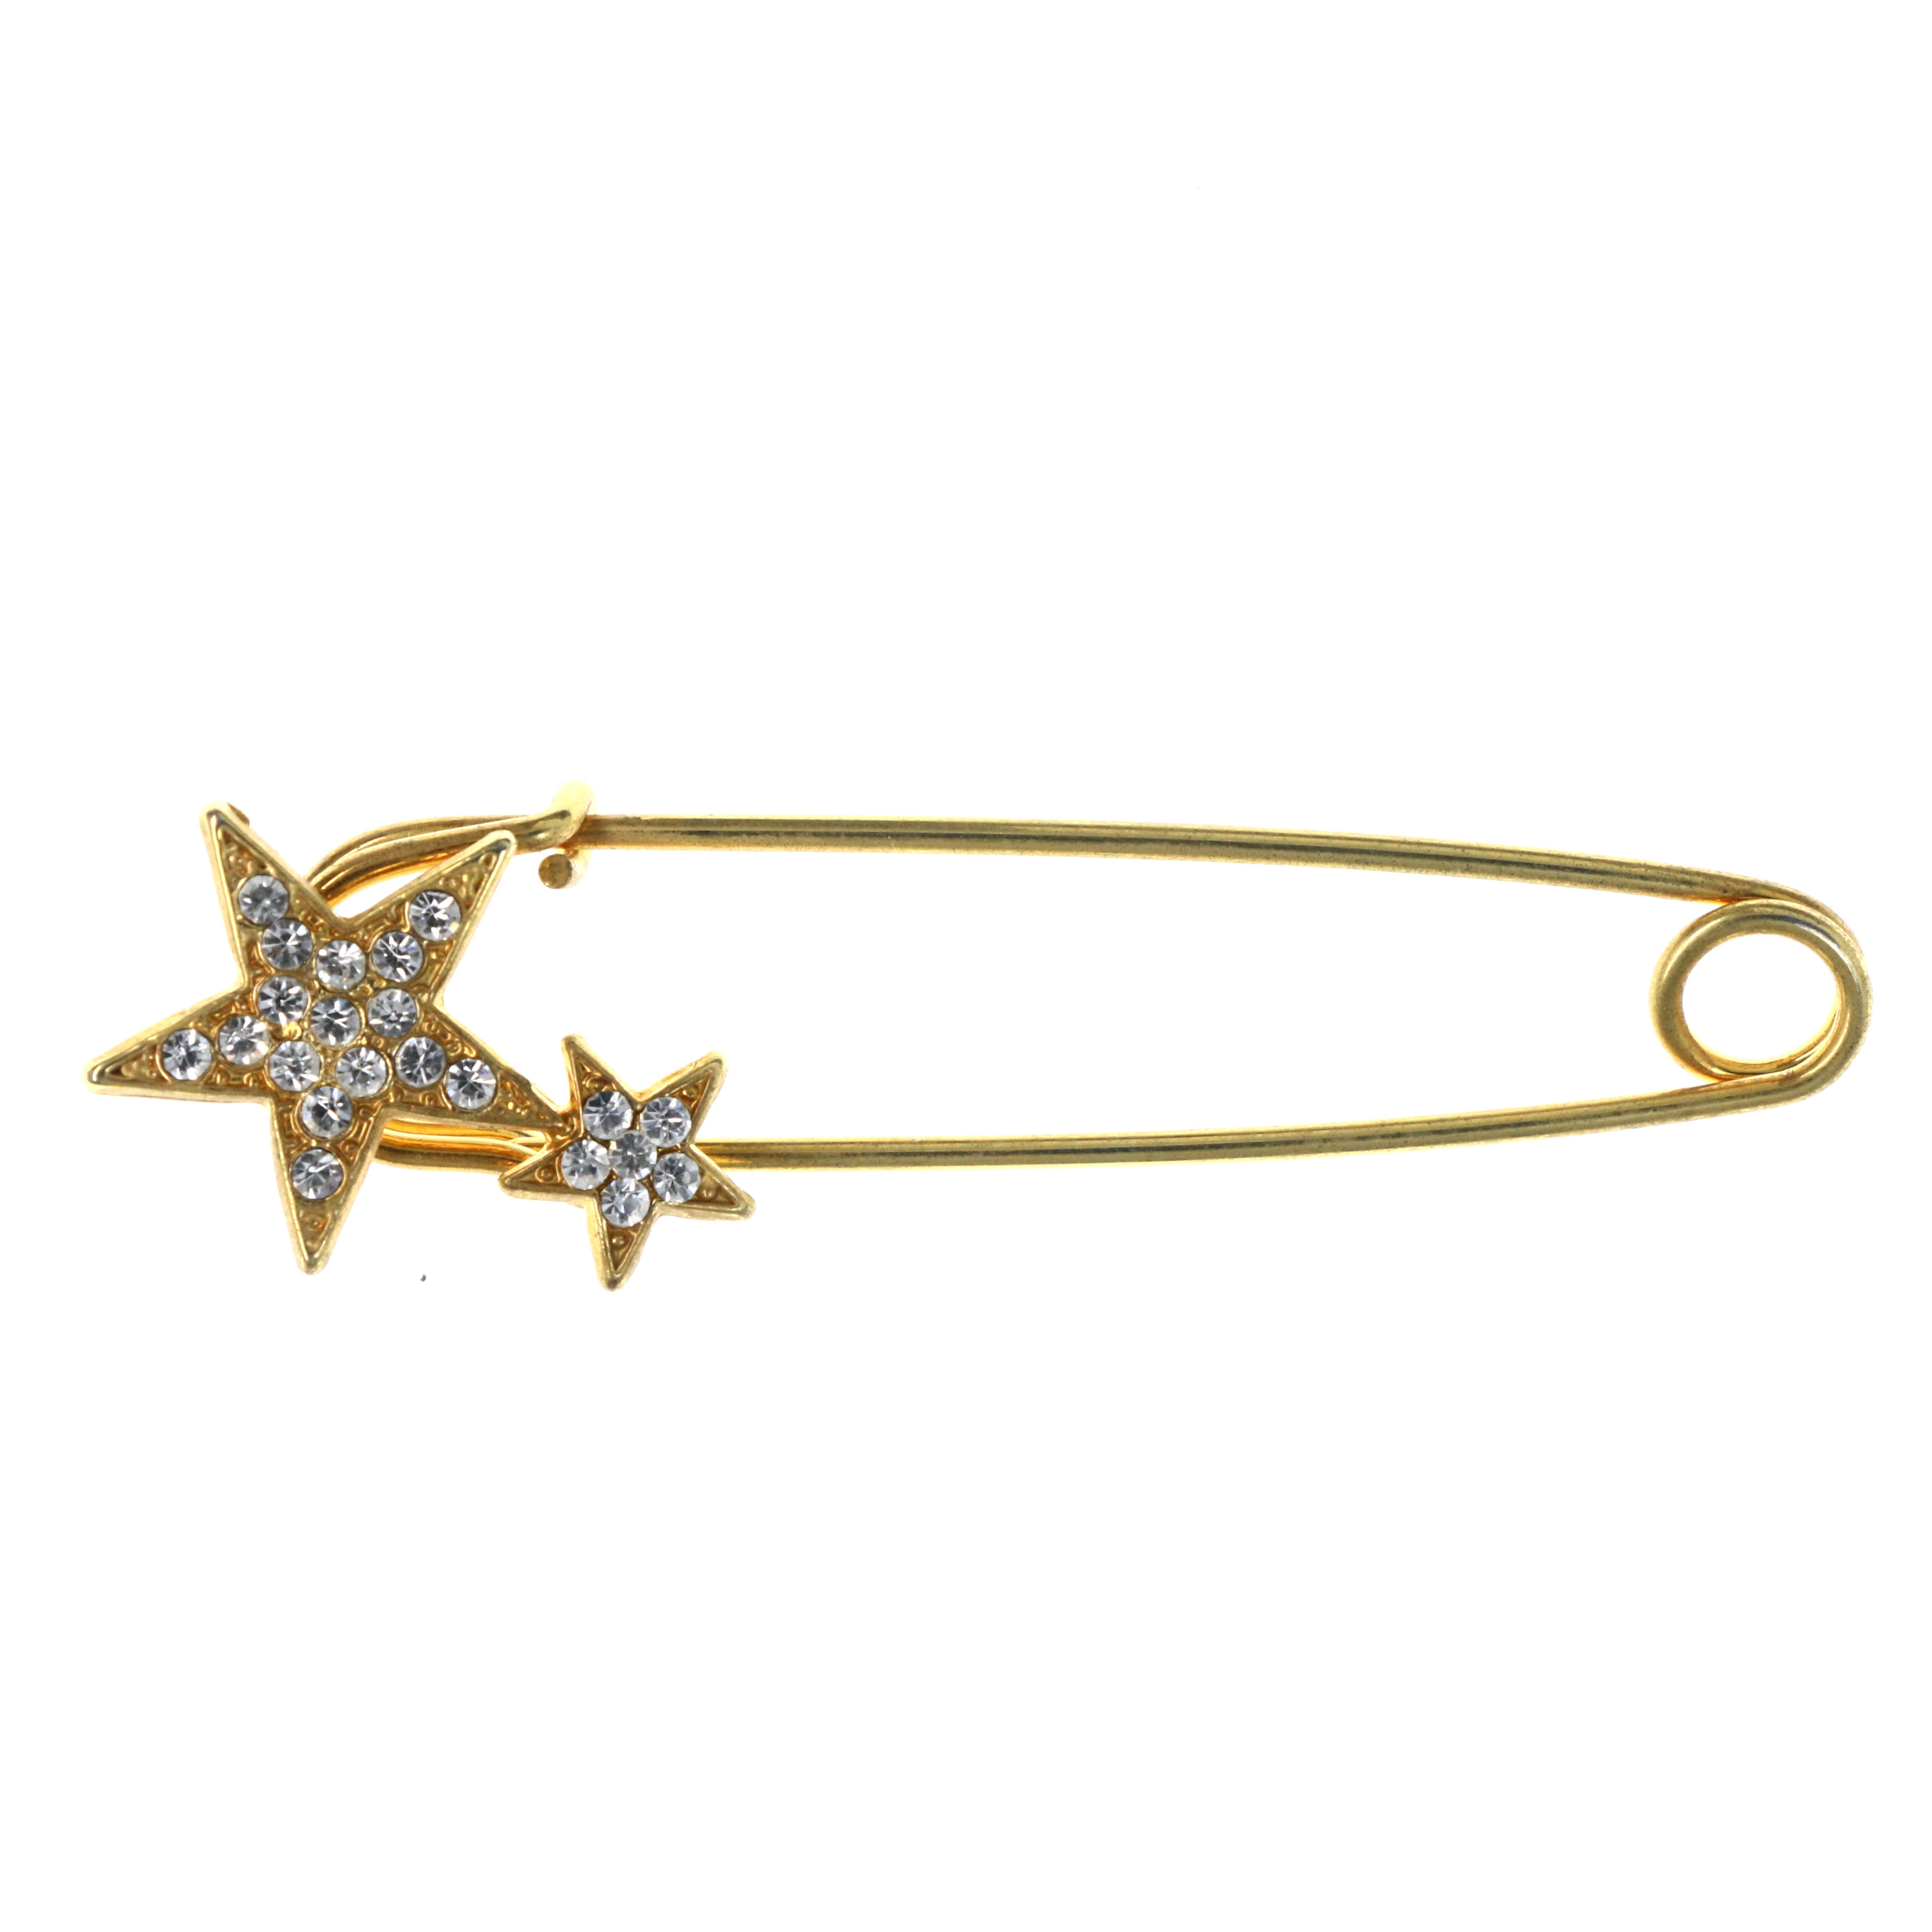 MI AMORE Saftey Pin Star Brooch-Pin With Crystal Accents Gold-Tone & Silver-Tone Colored #LQP1279